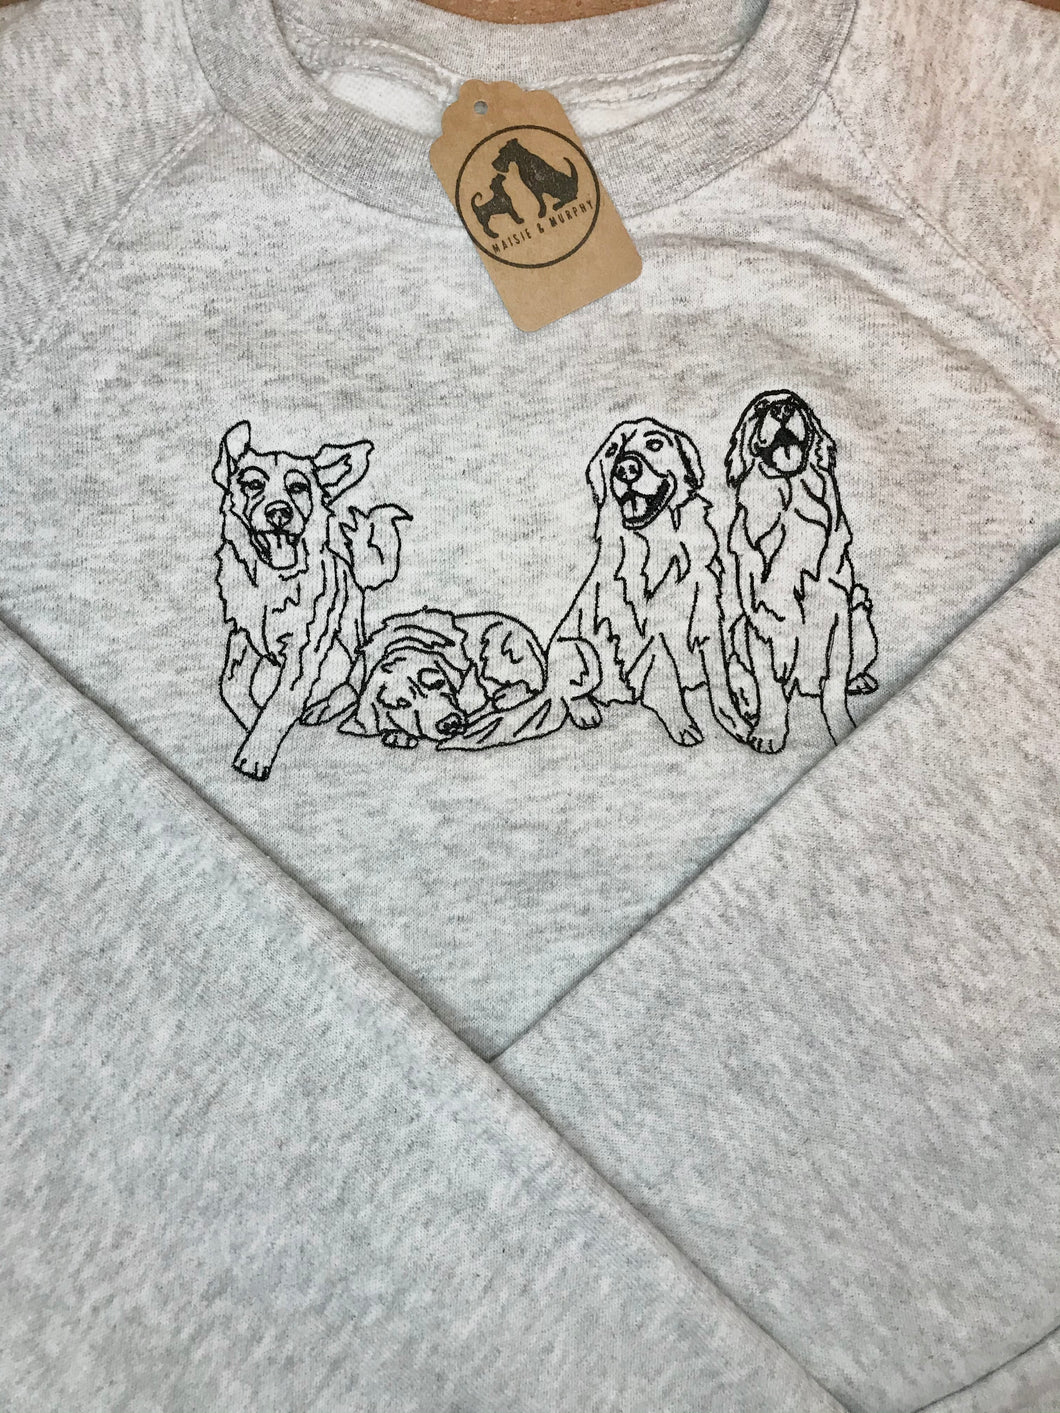 Embroidered Golden Retriever Sweatshirt - Gifts for dog lovers & owners